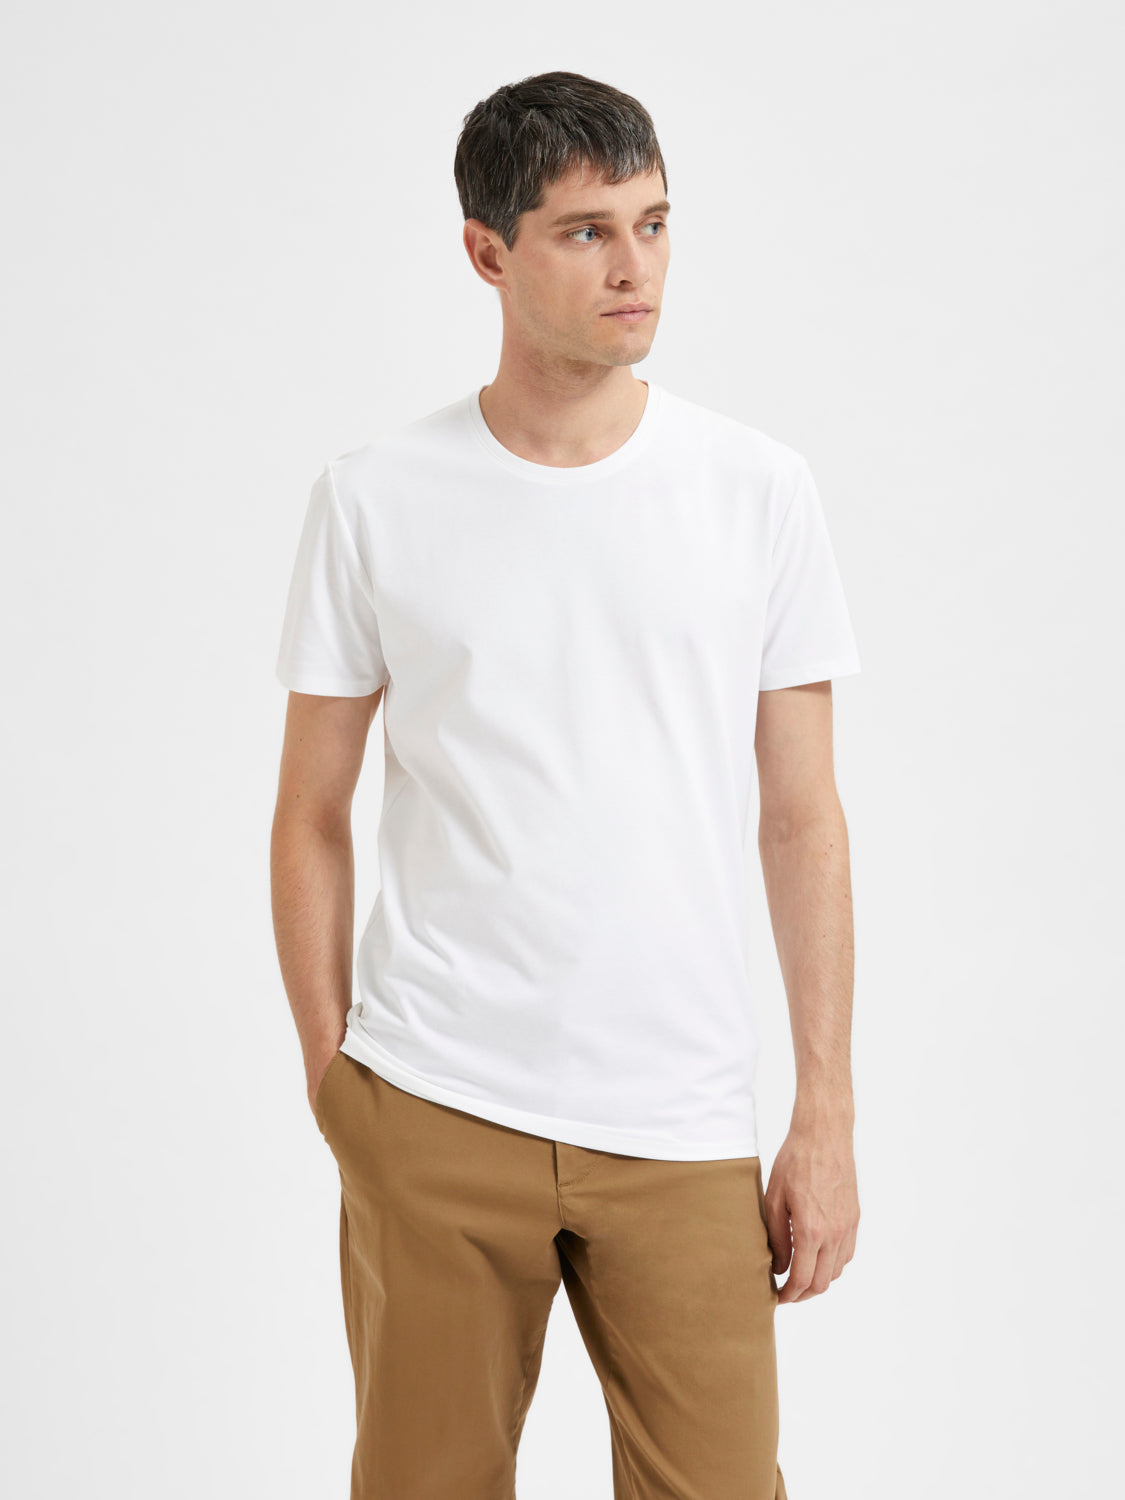 SELECTED HOMME - AEL T-Shirt - Bright White